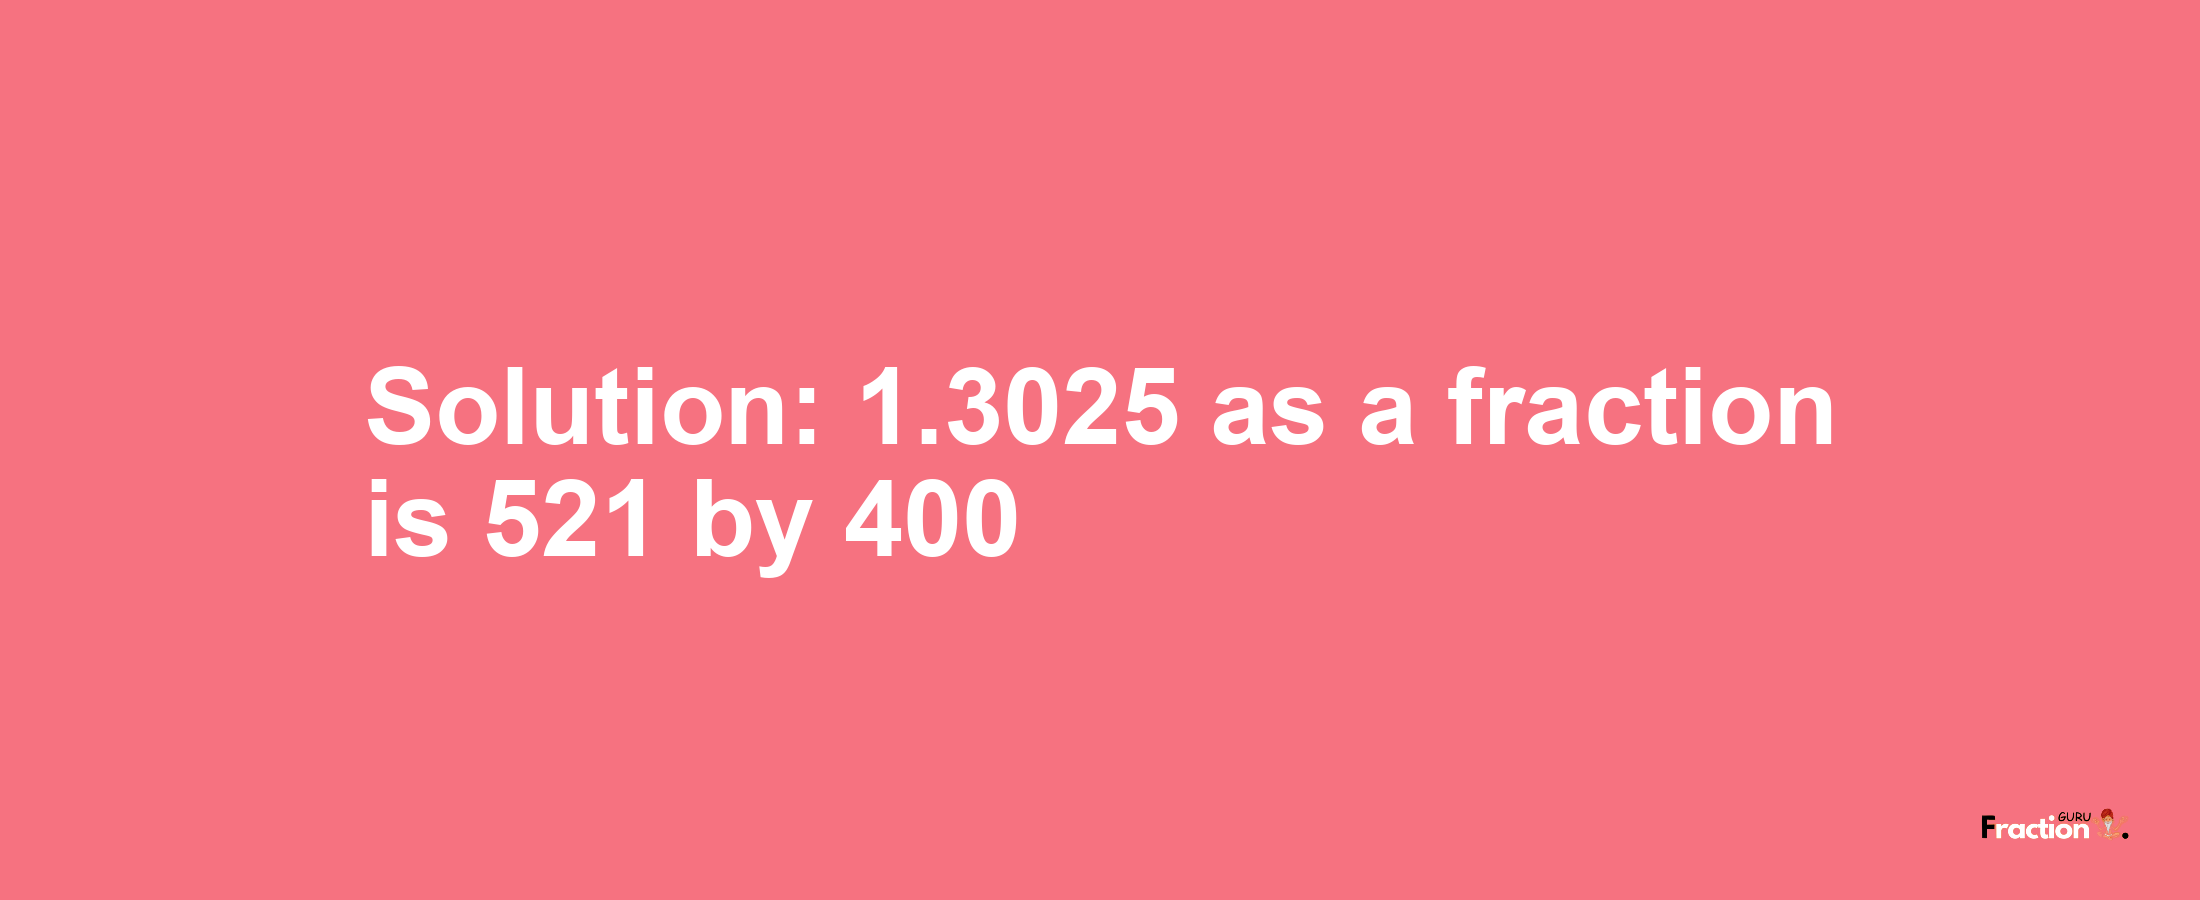 Solution:1.3025 as a fraction is 521/400